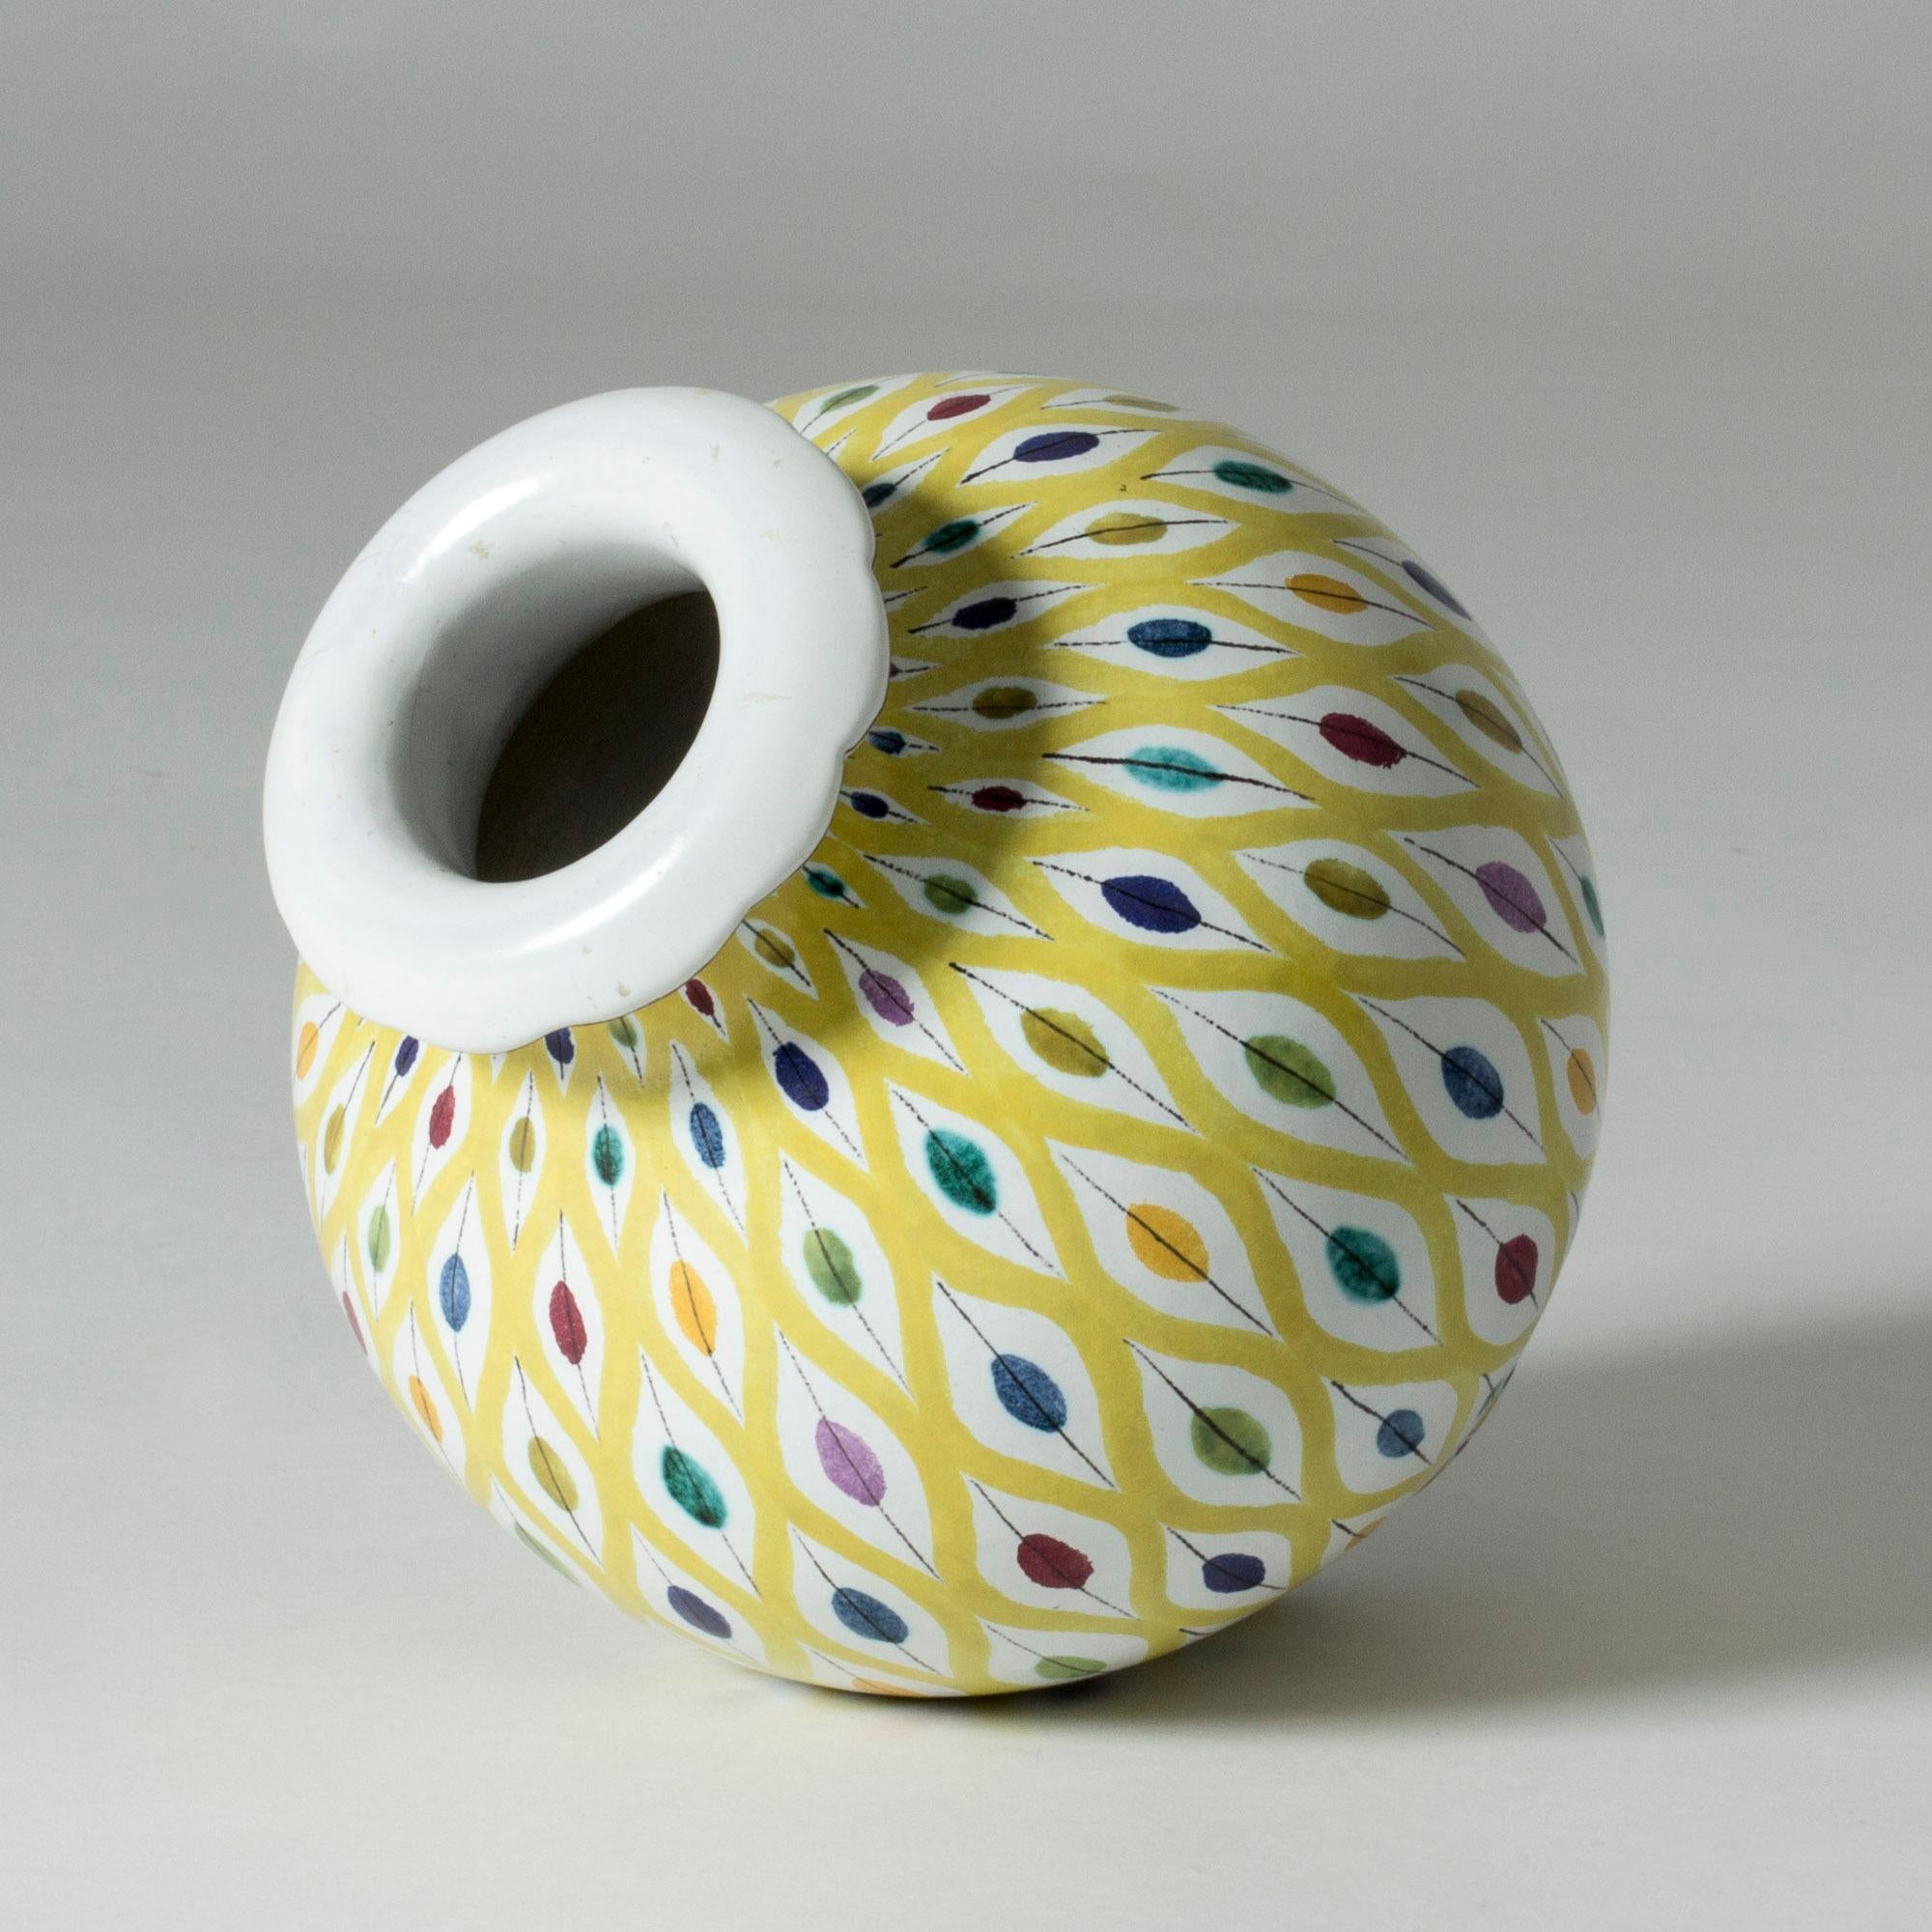 Stunning faience vase by Stig Lindberg in a lovely bulging shape. Beautiful colorful, graphic decor of leaves and vibrant yellow lines.